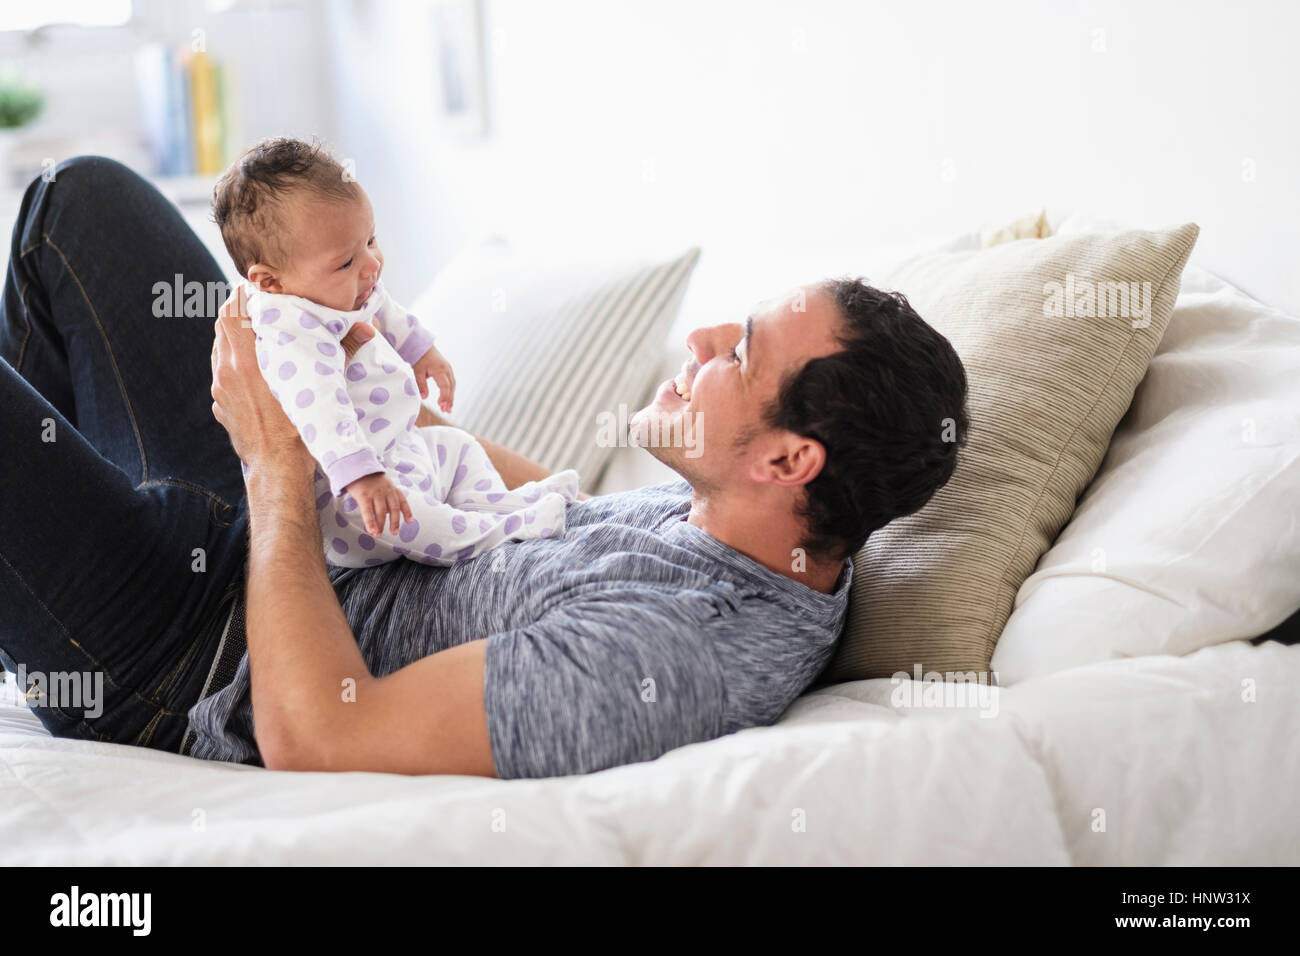 Hispanic father playing with baby daughter on bed Stock Photo